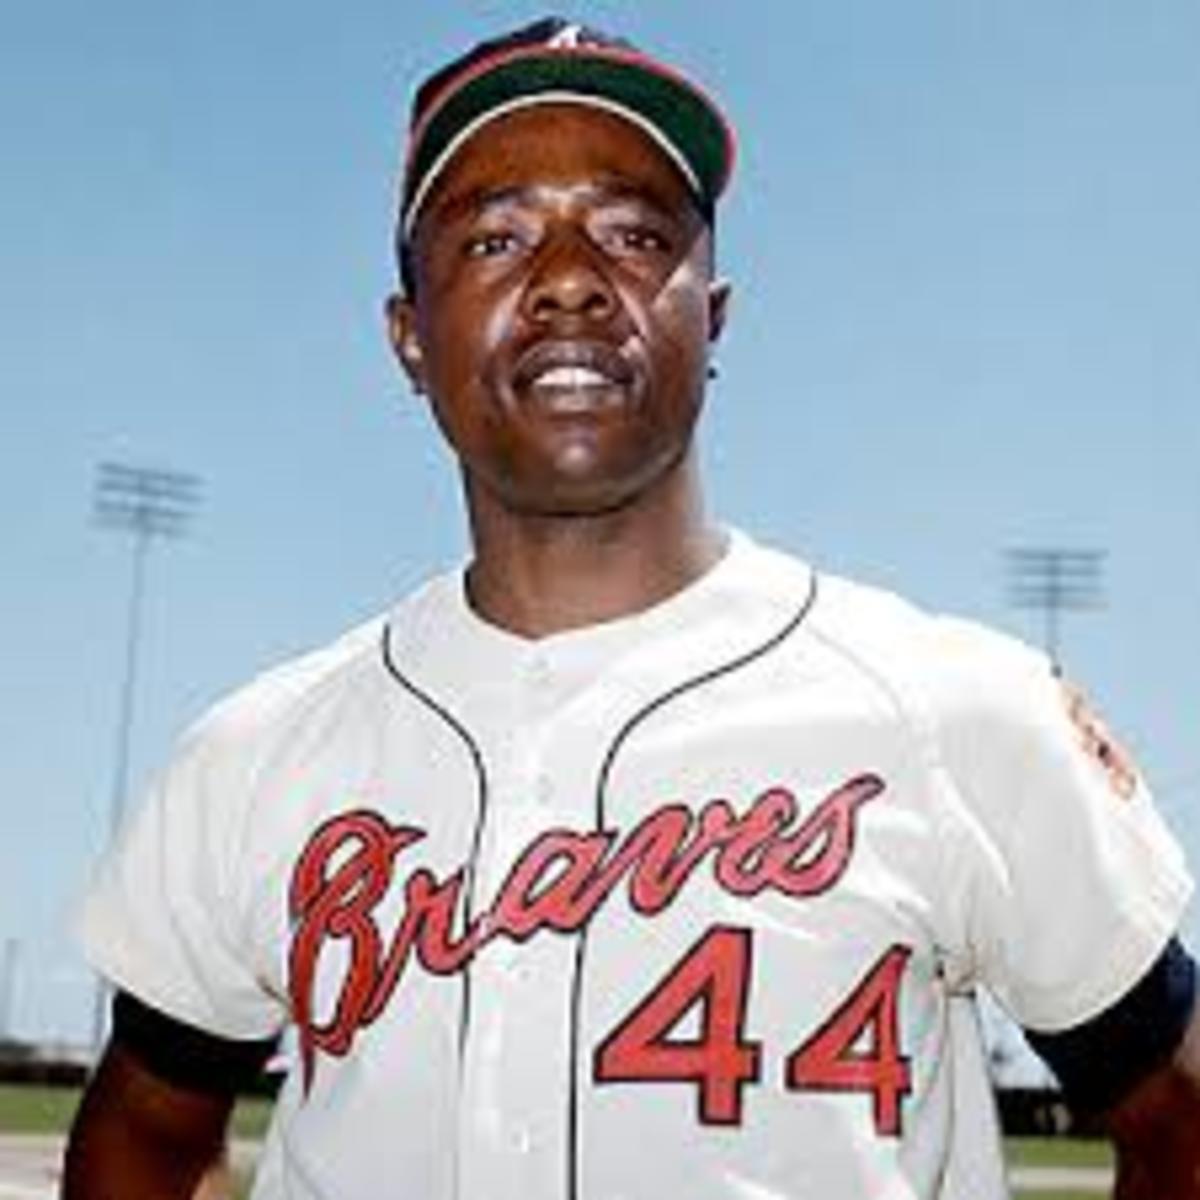 This gentleman hit home runs 1-733 (out of 755) as a Milwaukee and Atlanta Brave. (sabr.org)